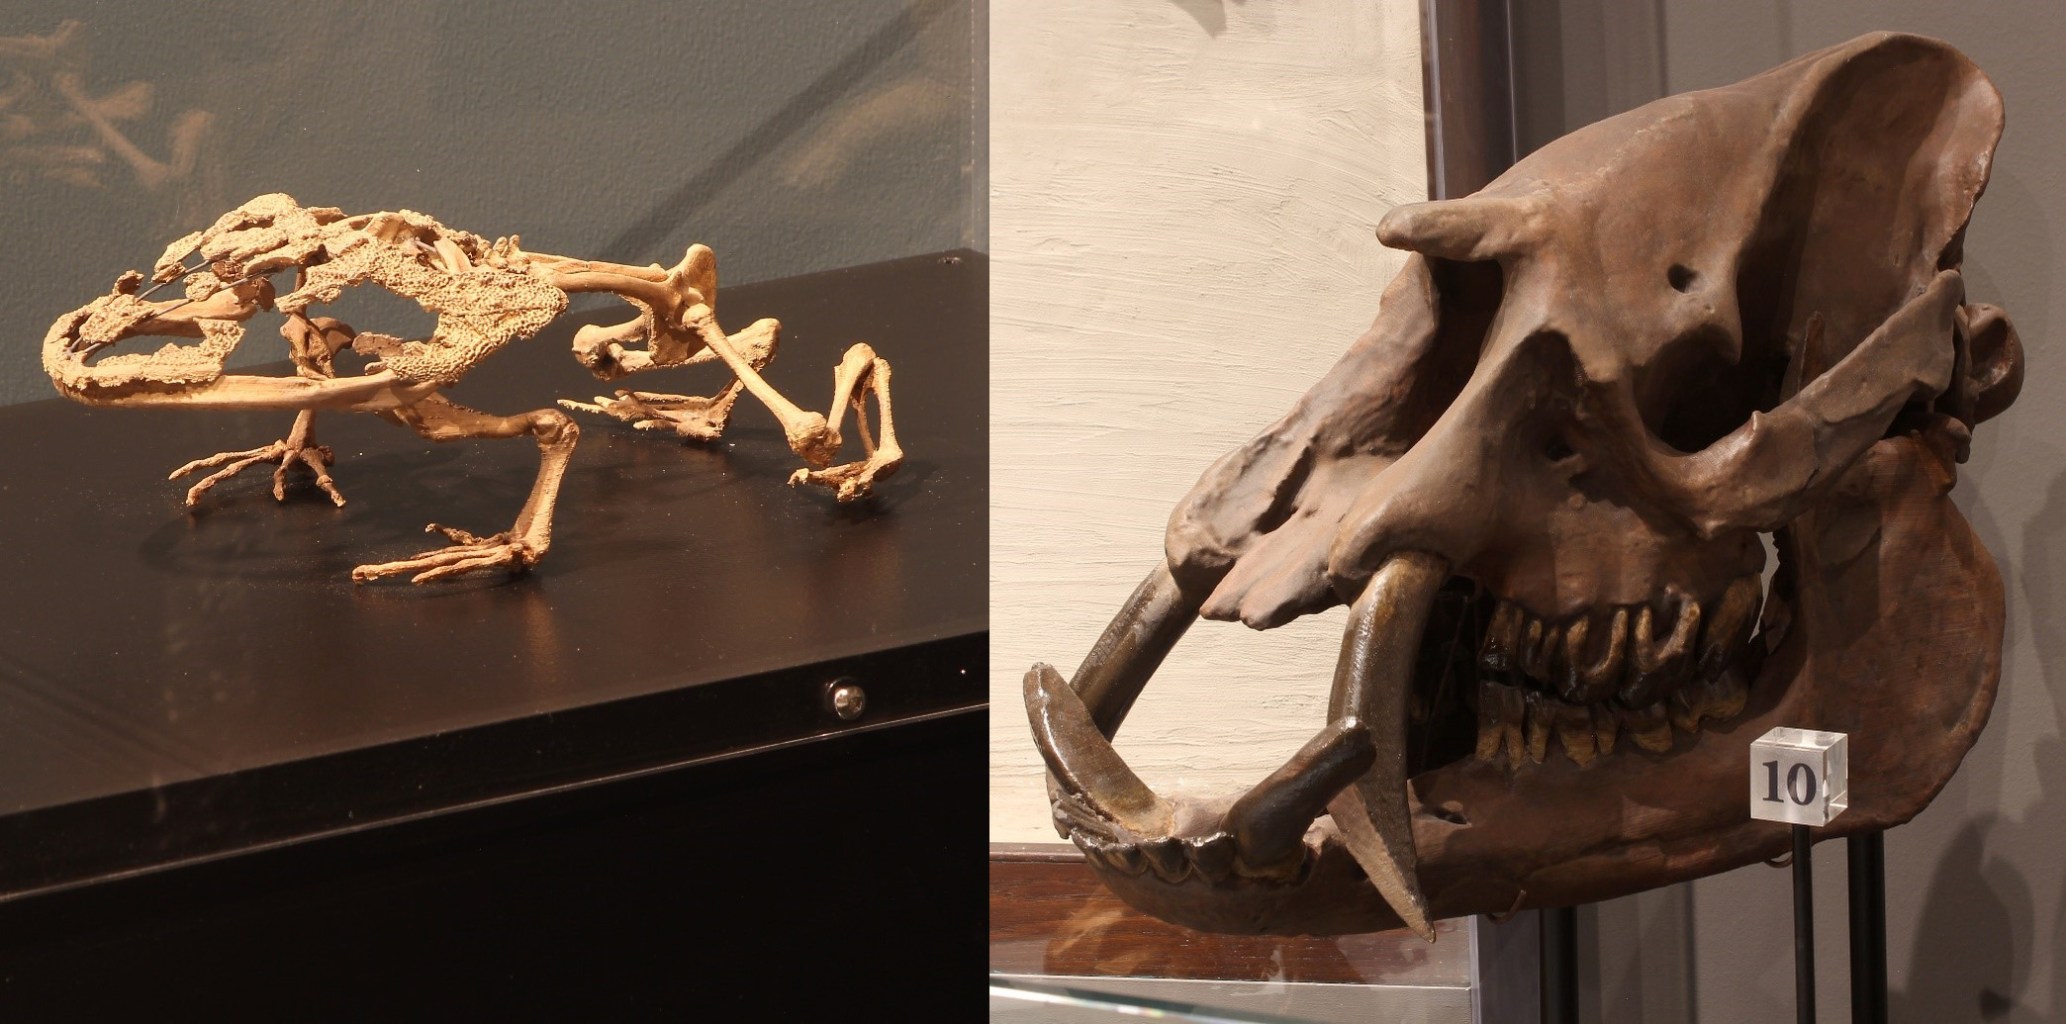 Two of UMMNH’s new display specimens 3D printed from digital models acquired through exchange with other institutions. Left, Beelzebufo; Right, Astrapotherium. Photo credit: Michael Cherney.